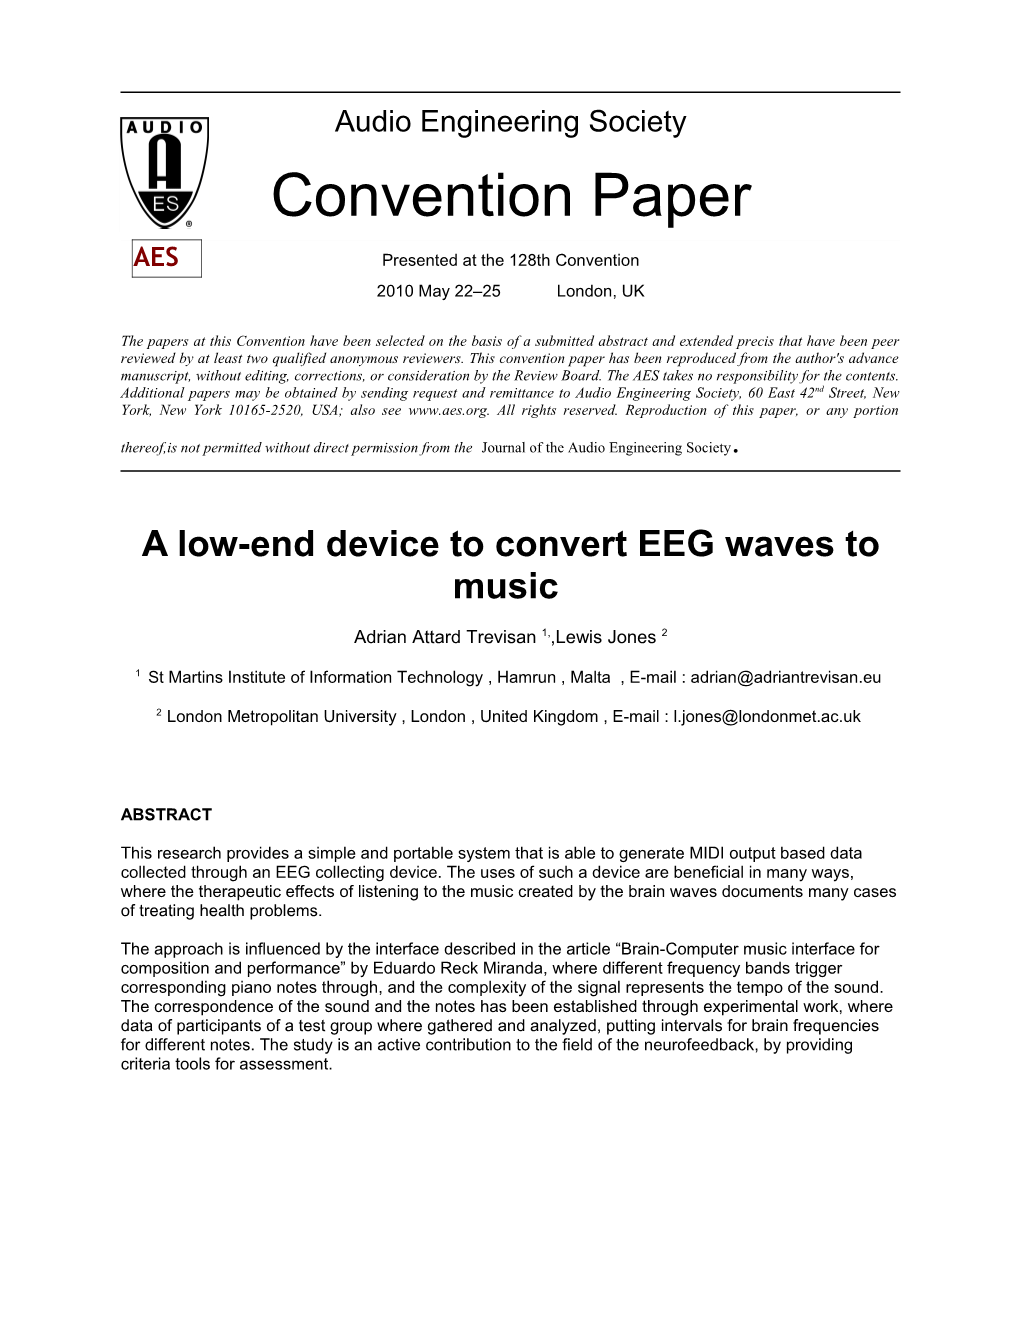 Audio Engineering Society Convention Paper